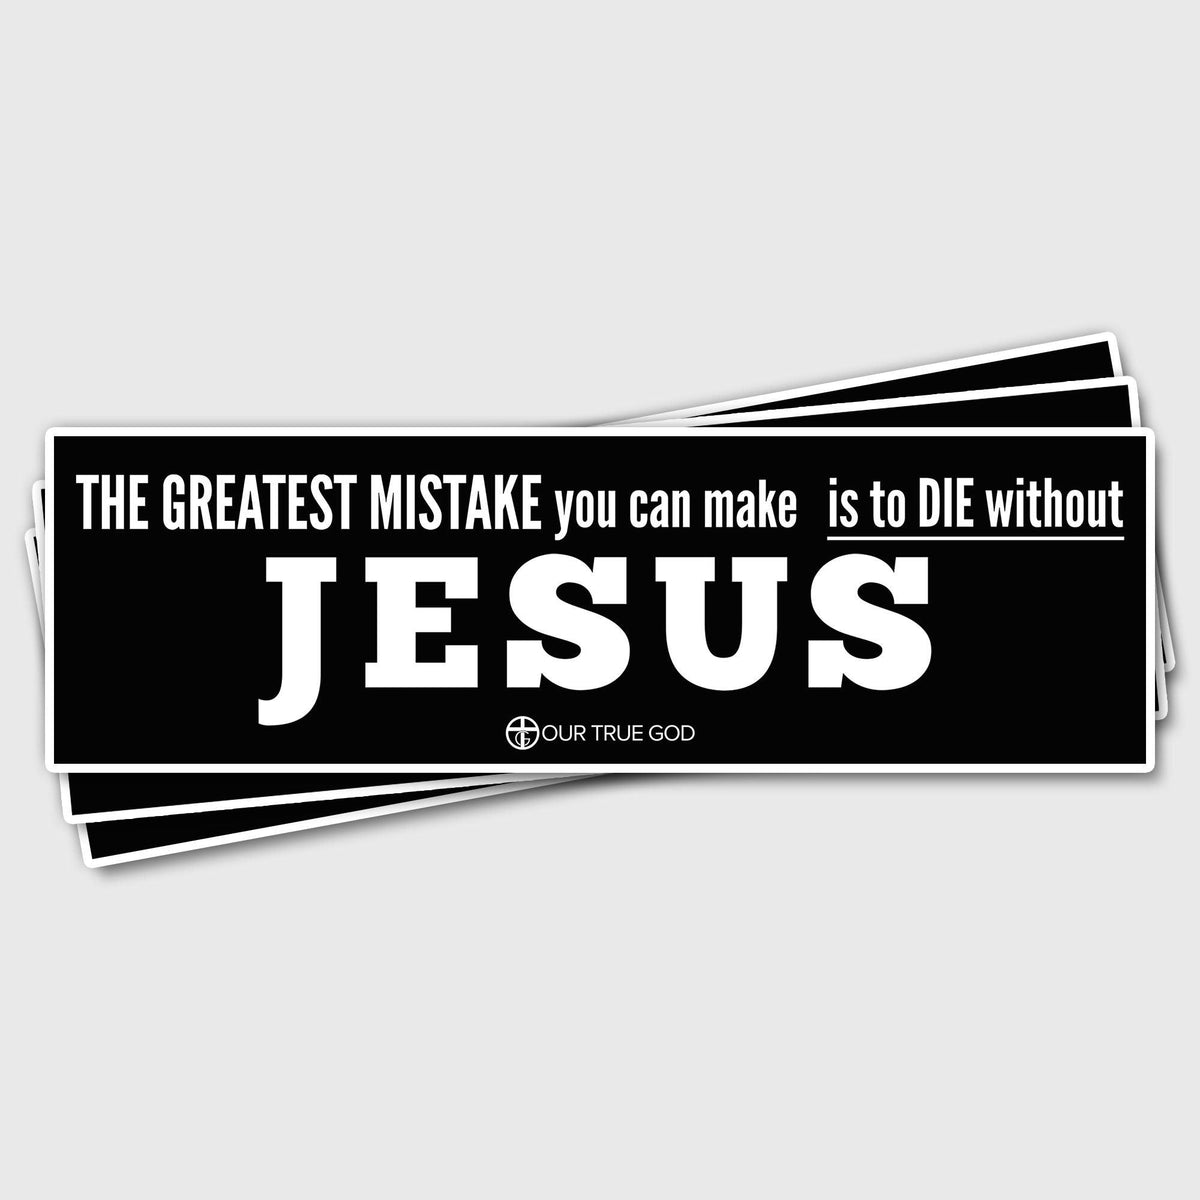 The Greatest Mistake is to Die Without Jesus Bumper Stickers